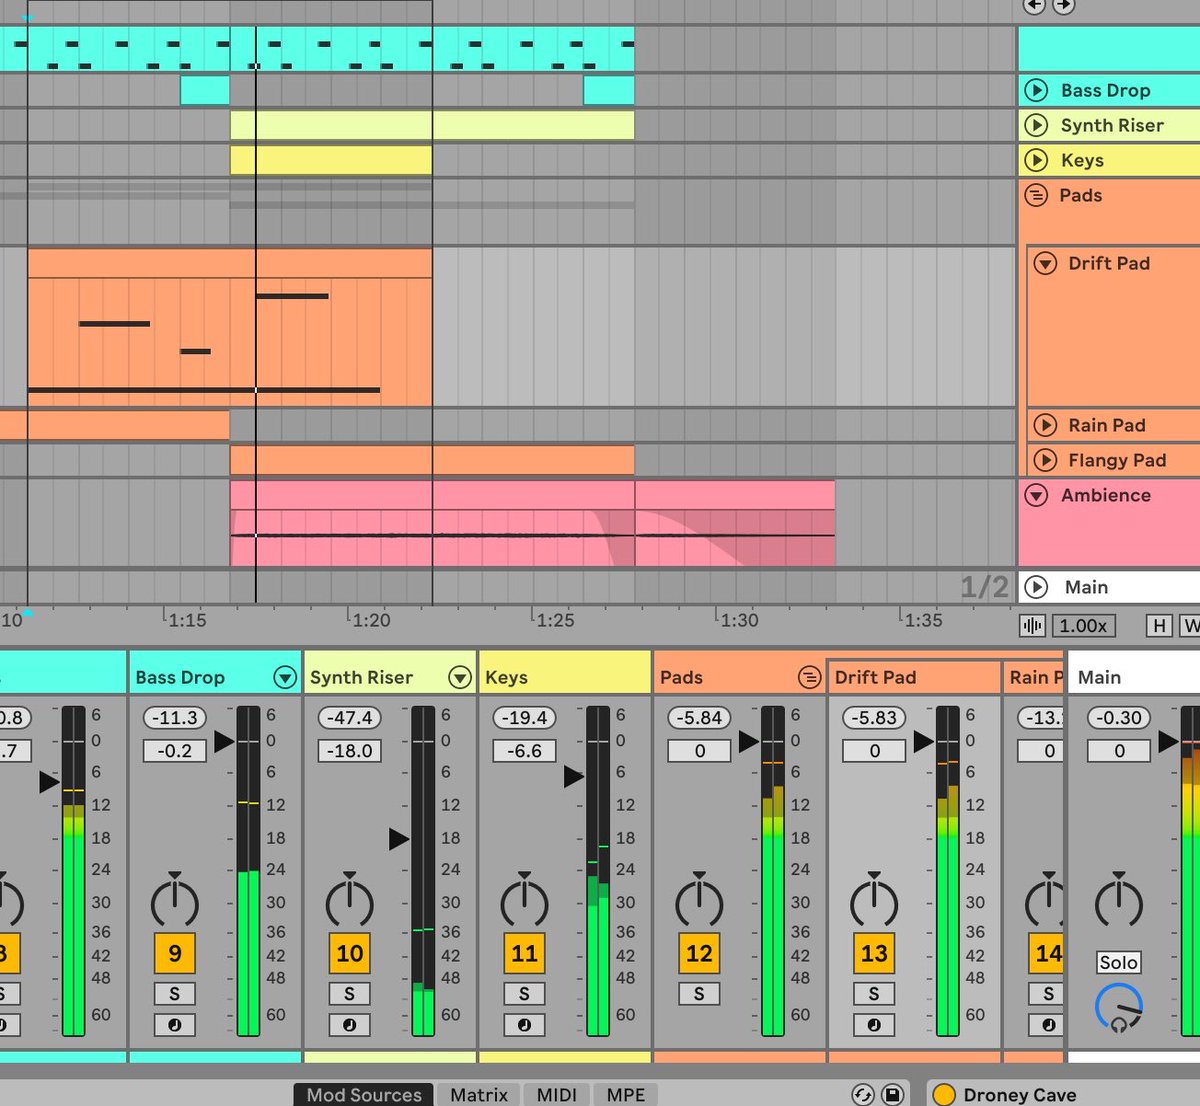 Great program but Ableton is objectively hideous